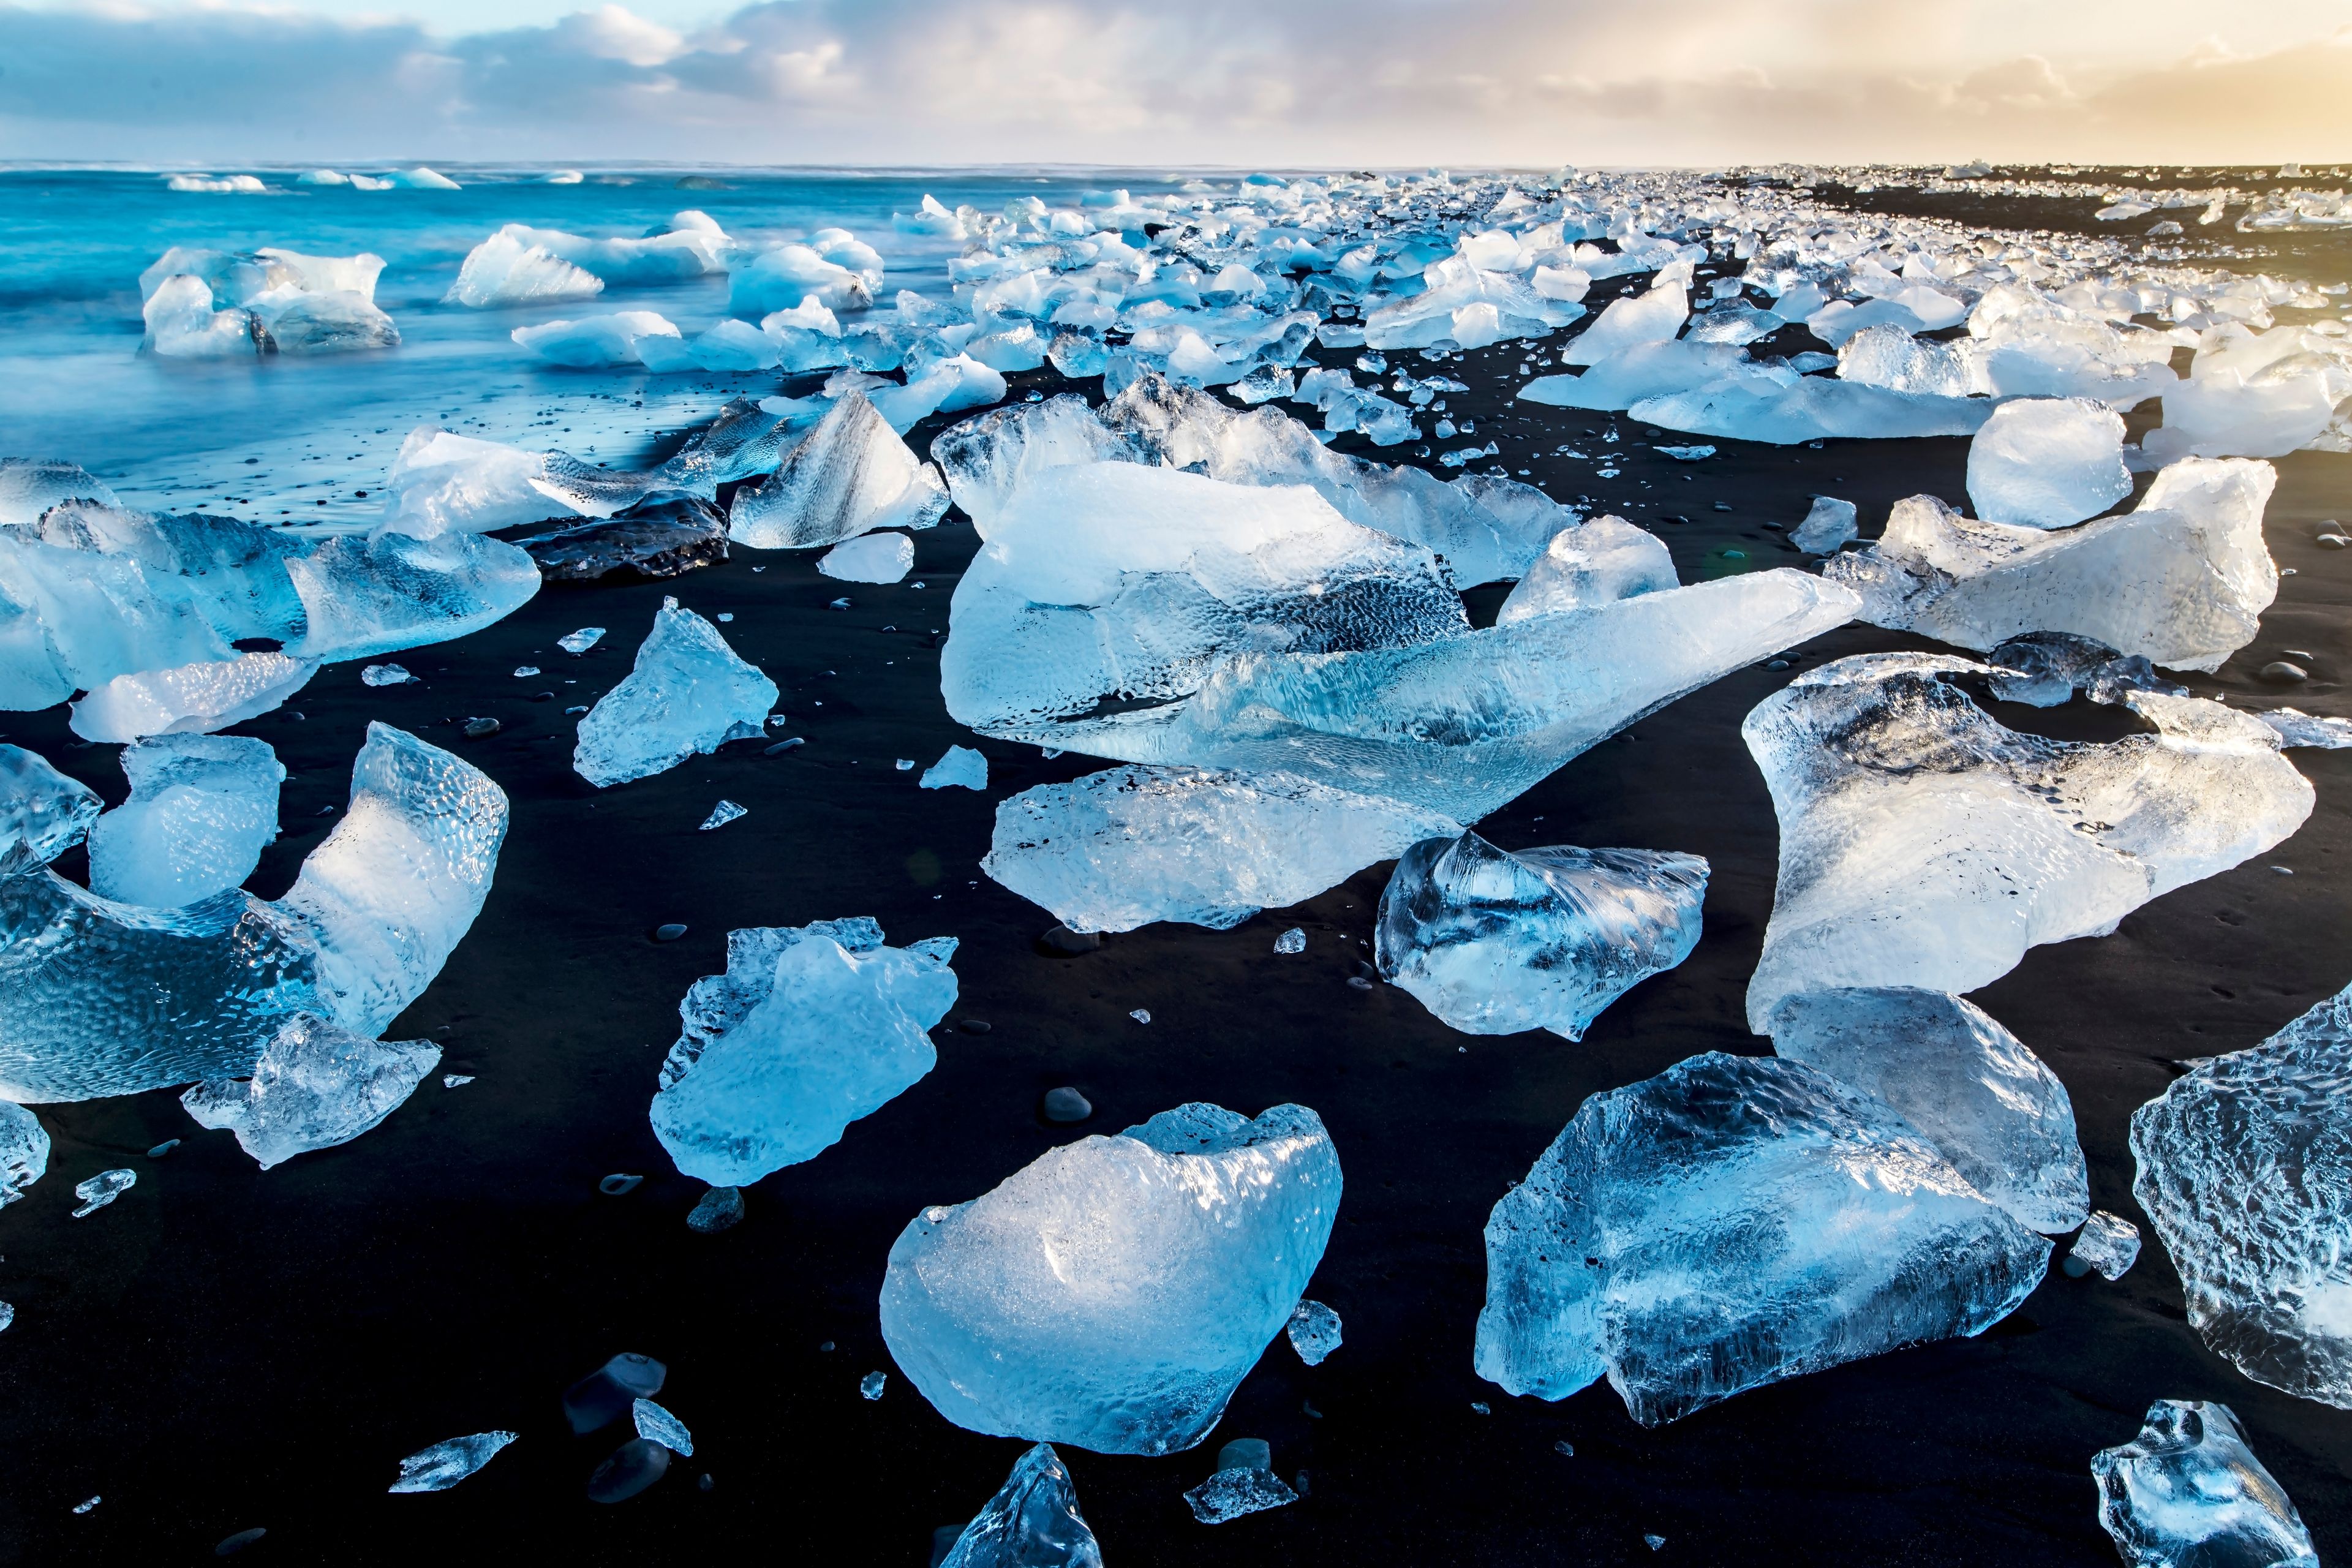 Diamond Beach in Iceland, where the black sand contrasts with the sparkling ice chunks scattered along the shore, creating a breathtaking natural wonder.